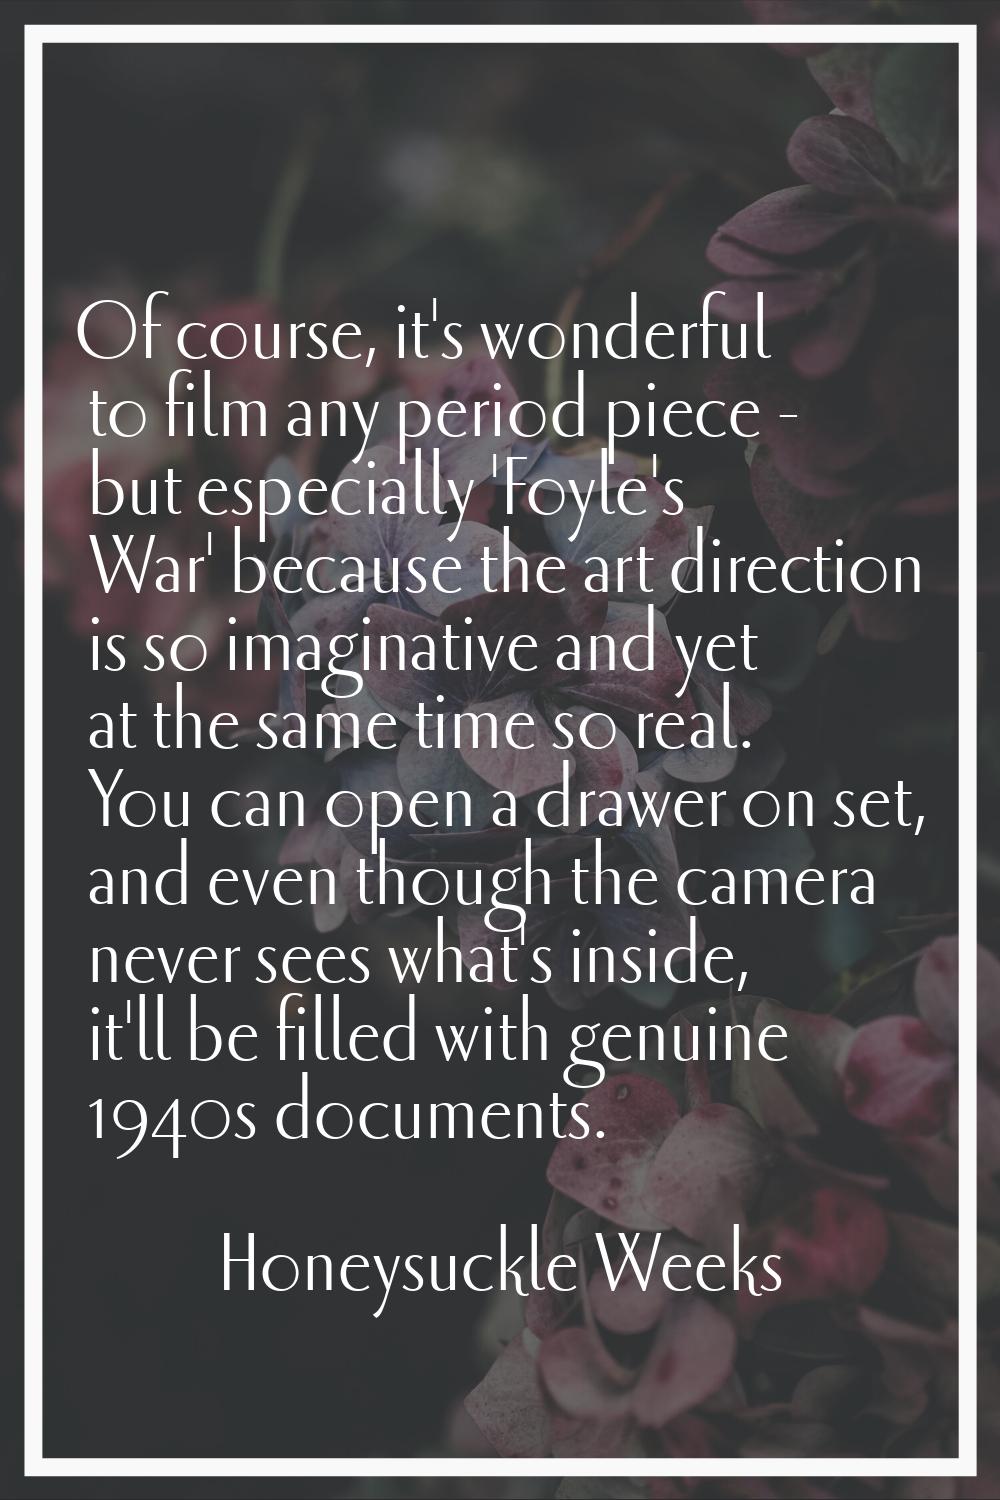 Of course, it's wonderful to film any period piece - but especially 'Foyle's War' because the art d